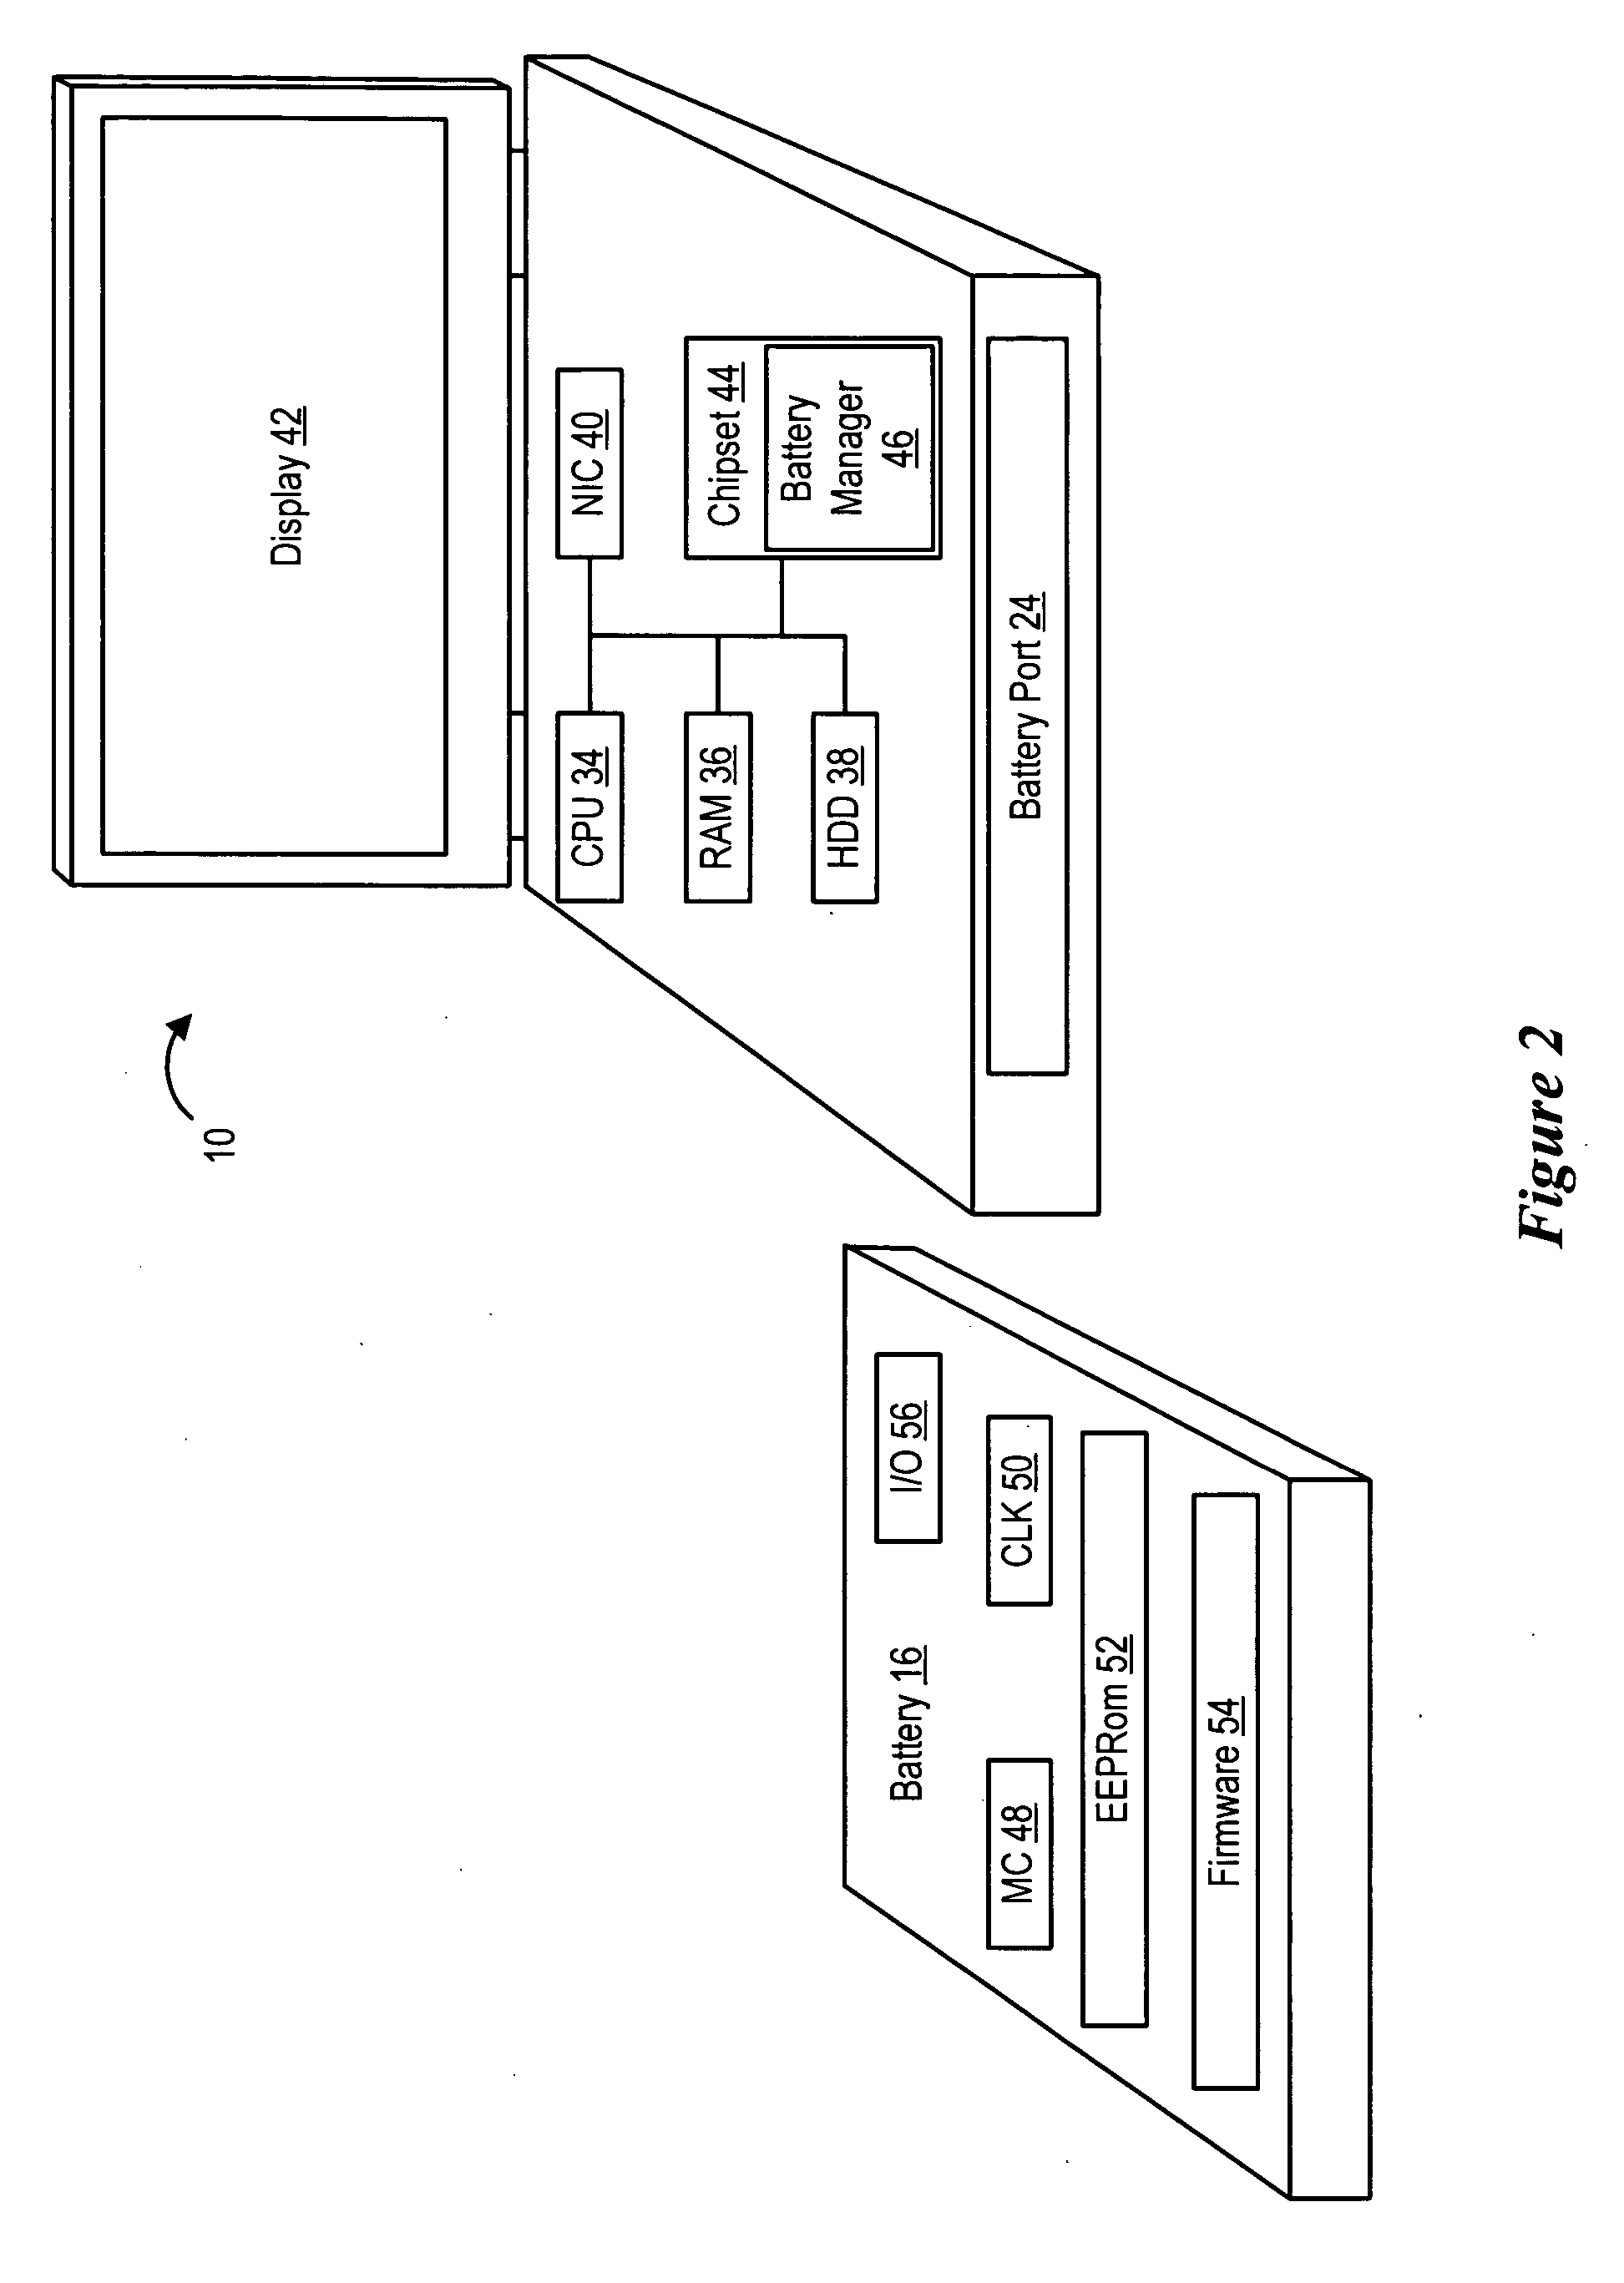 System and method for information handling system battery monitoring